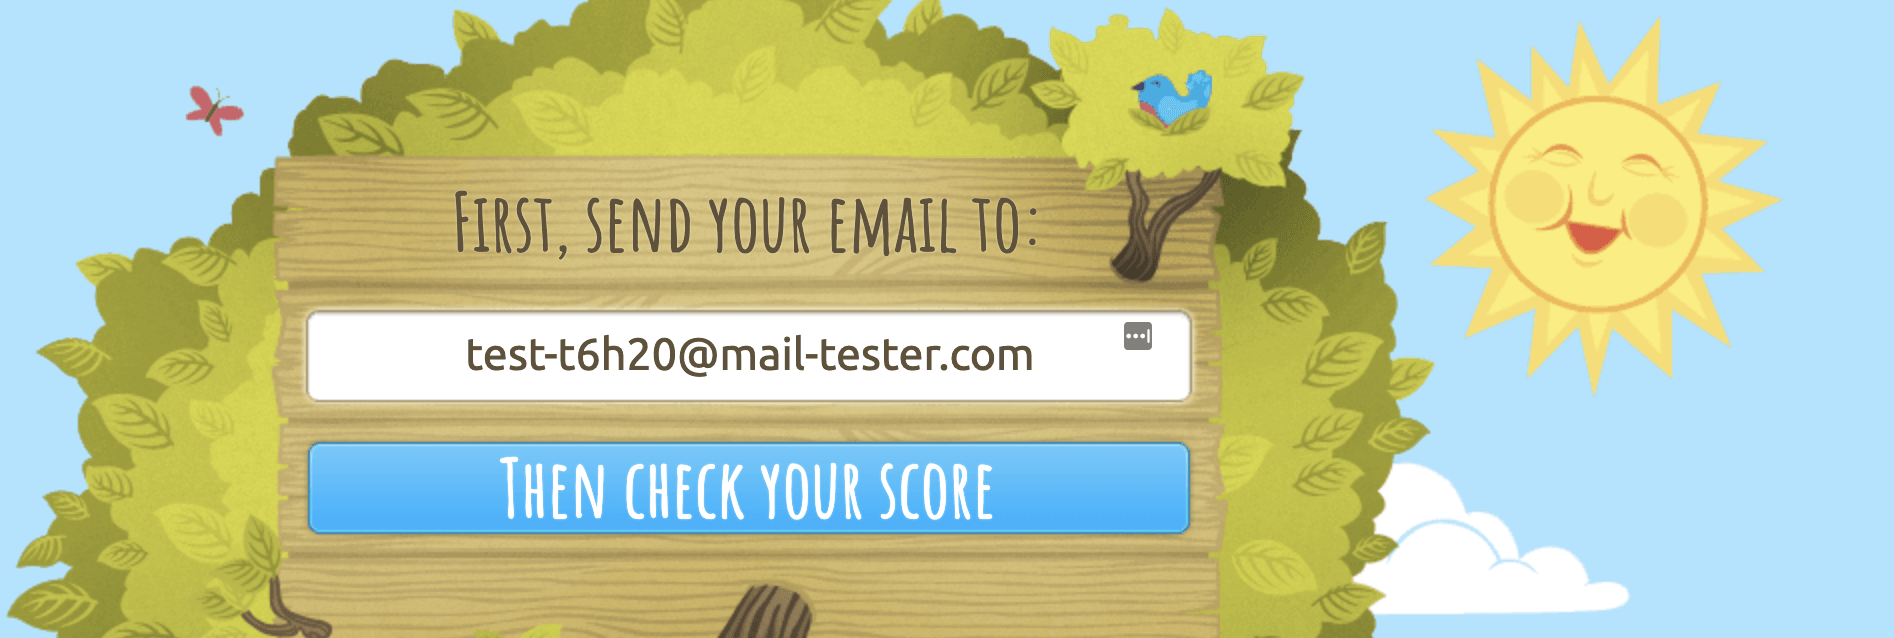 Email spam tester logo